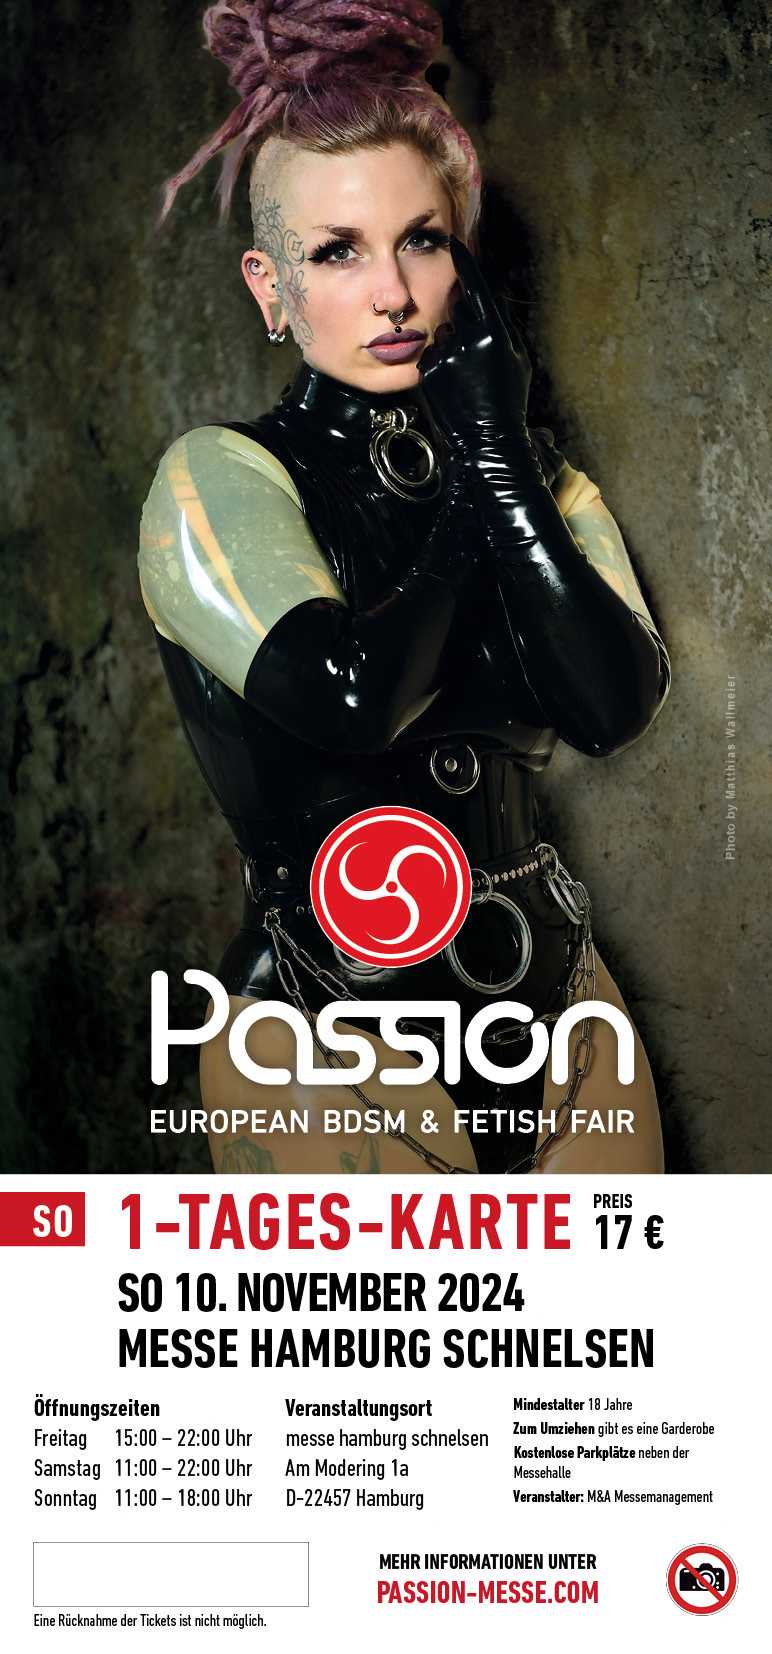 Passion Messe - 1-Day-Exhibition-Ticket Sunday